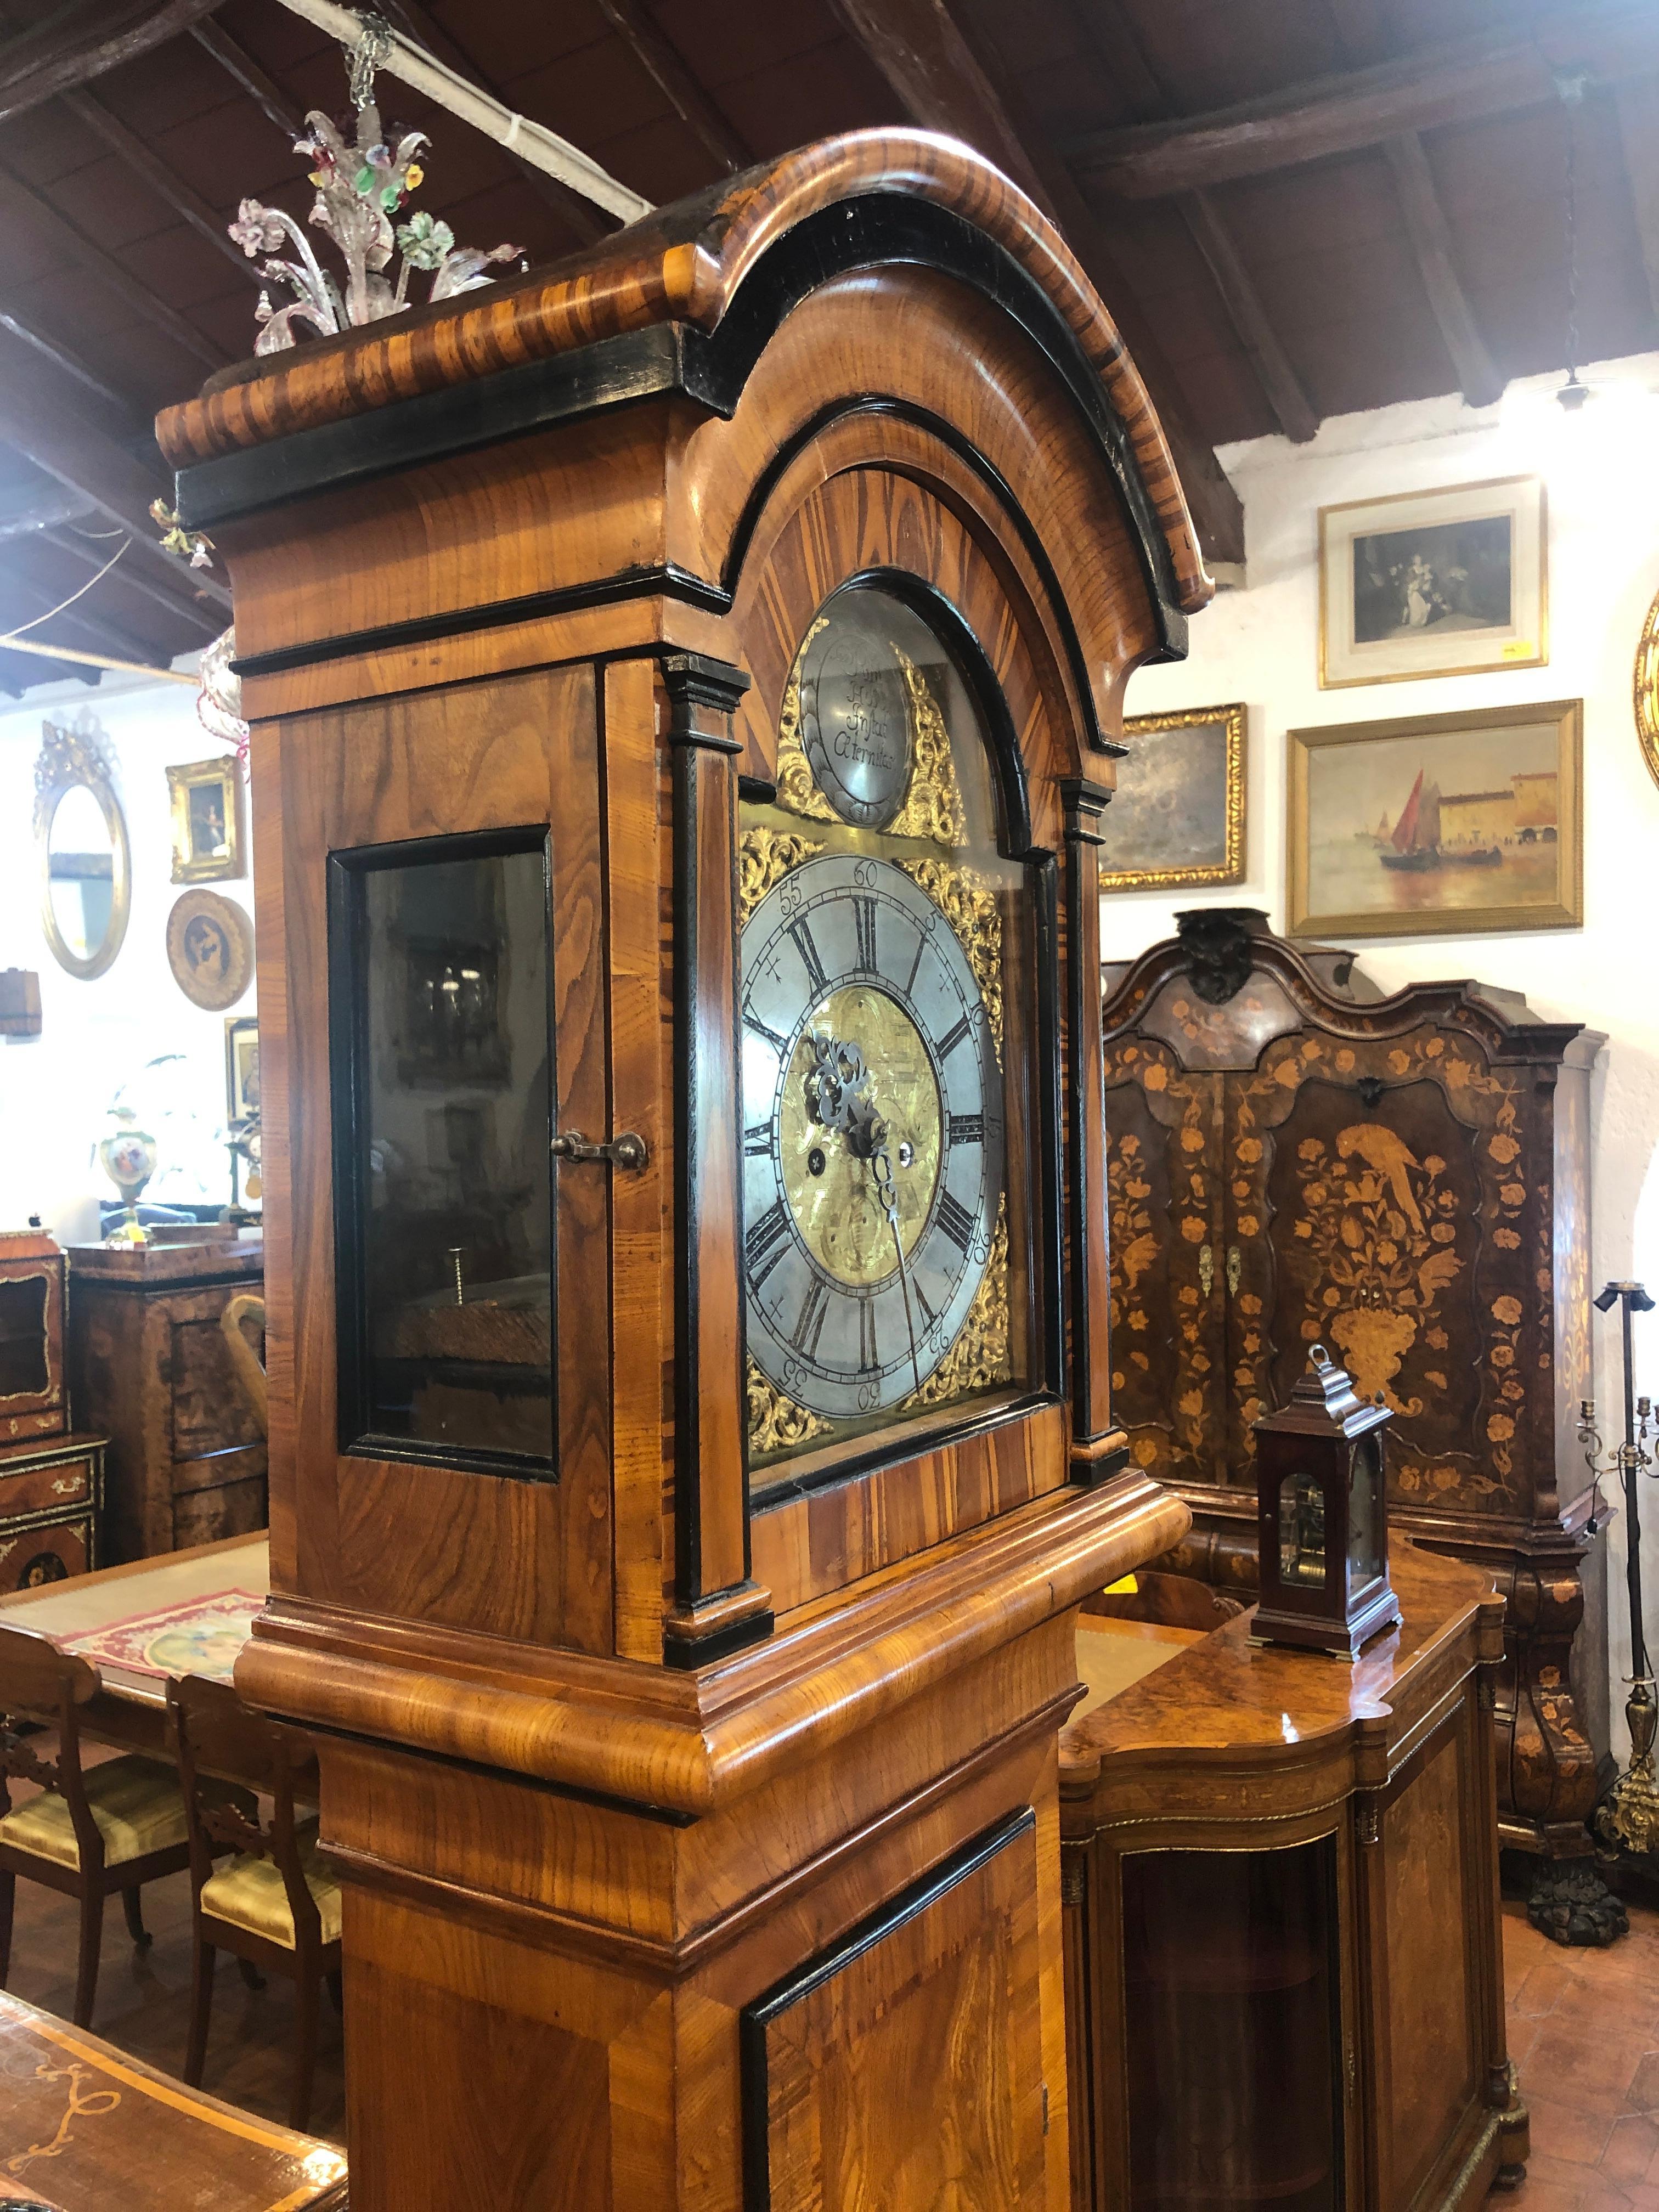 Grandfather's clock from North European origin, Sweden. Of excellent workmanship, in elm wood, embellished with games of wood grain, ebonized parts. The mechanism is revised and working.
Period 1790.